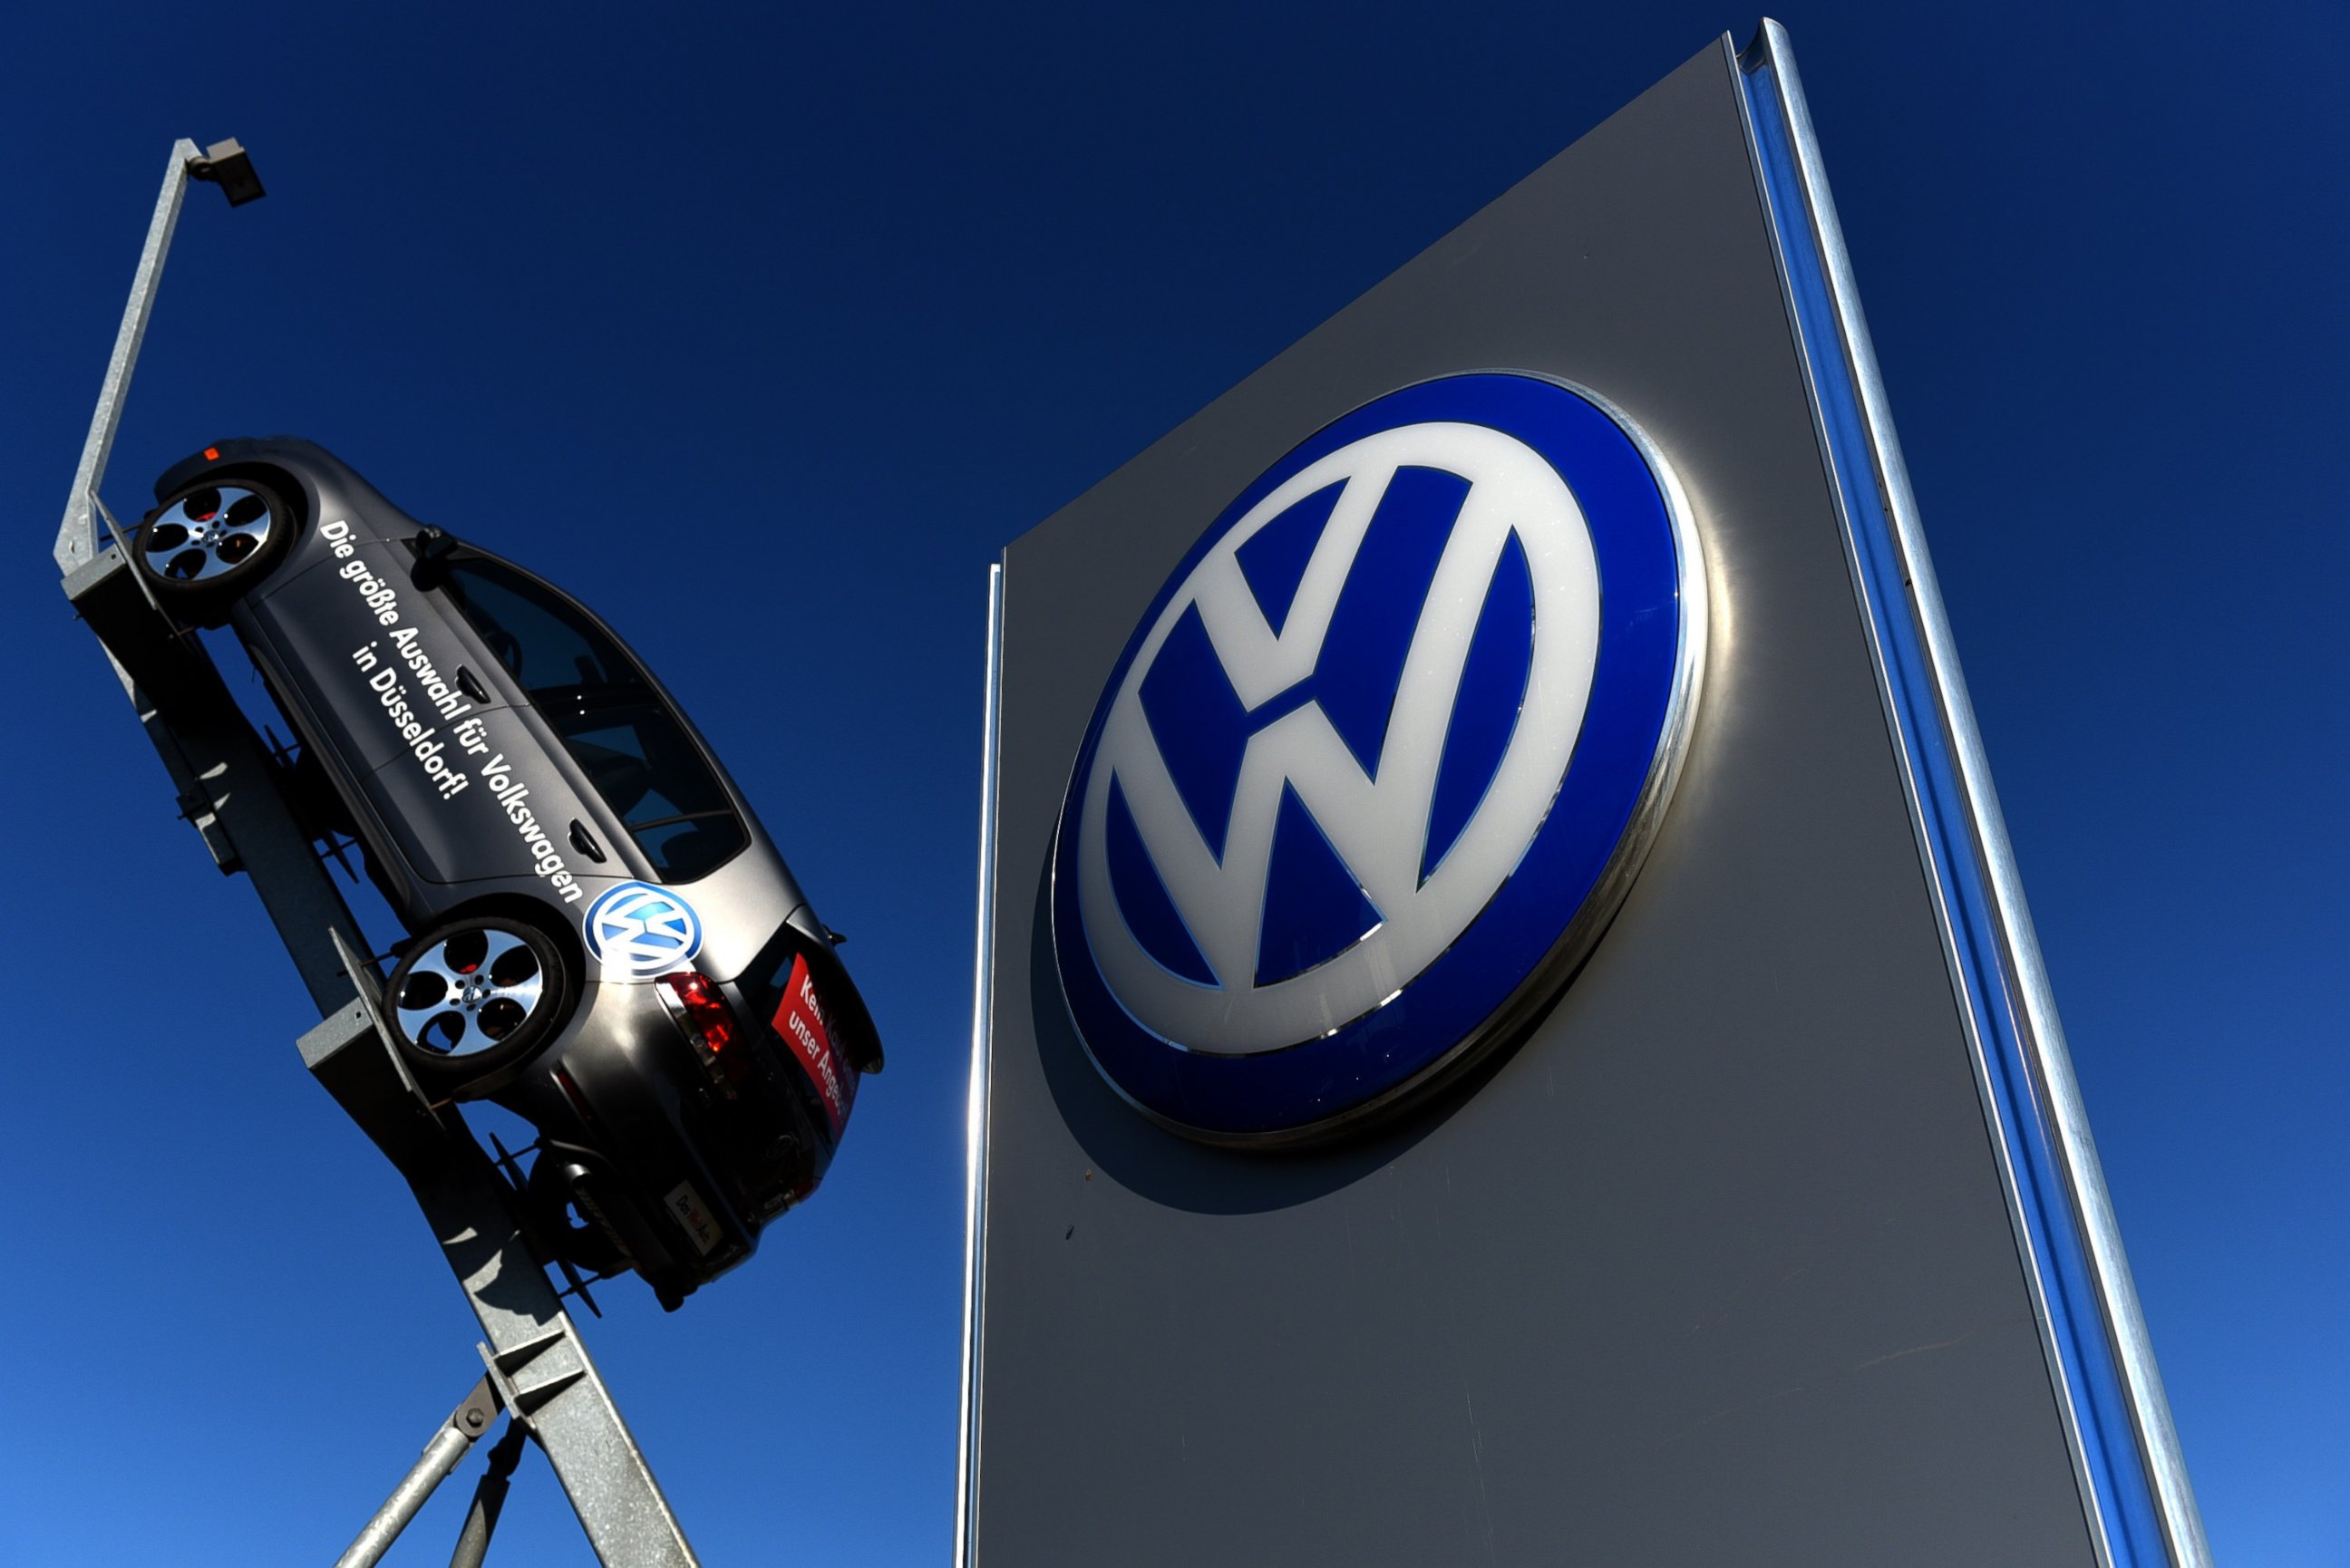 PHOTO: A model and logo of German car maker Volkswagen are seen at the entrance to a VW branch in Duesseldorf, Germany on Sept. 28, 2015.  